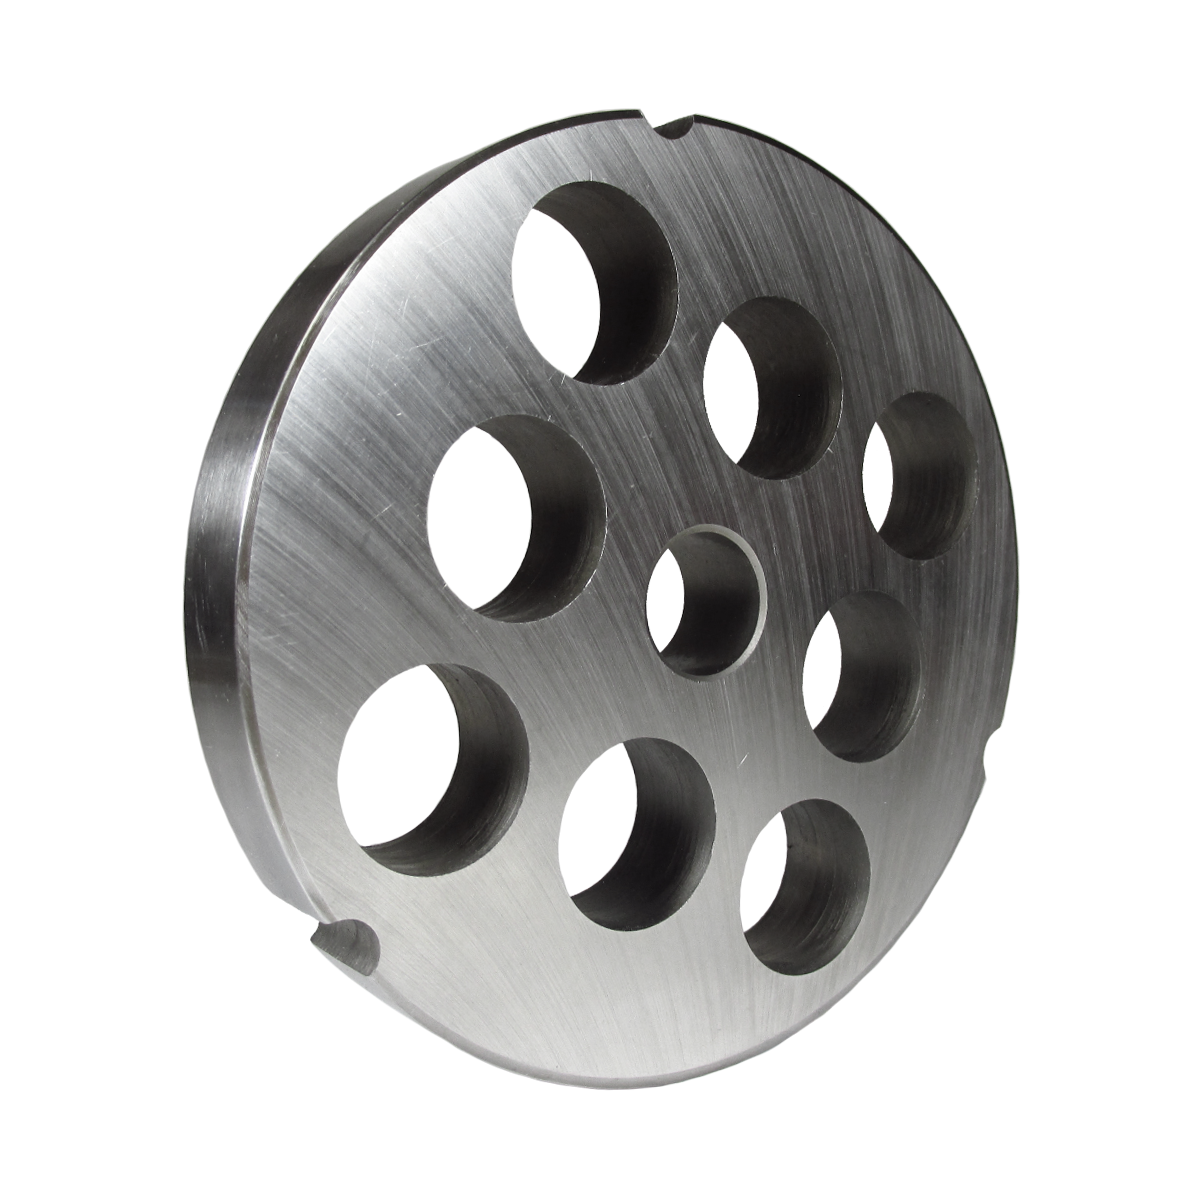 Grinder plate for #52 grinders with 1" hole, reversible